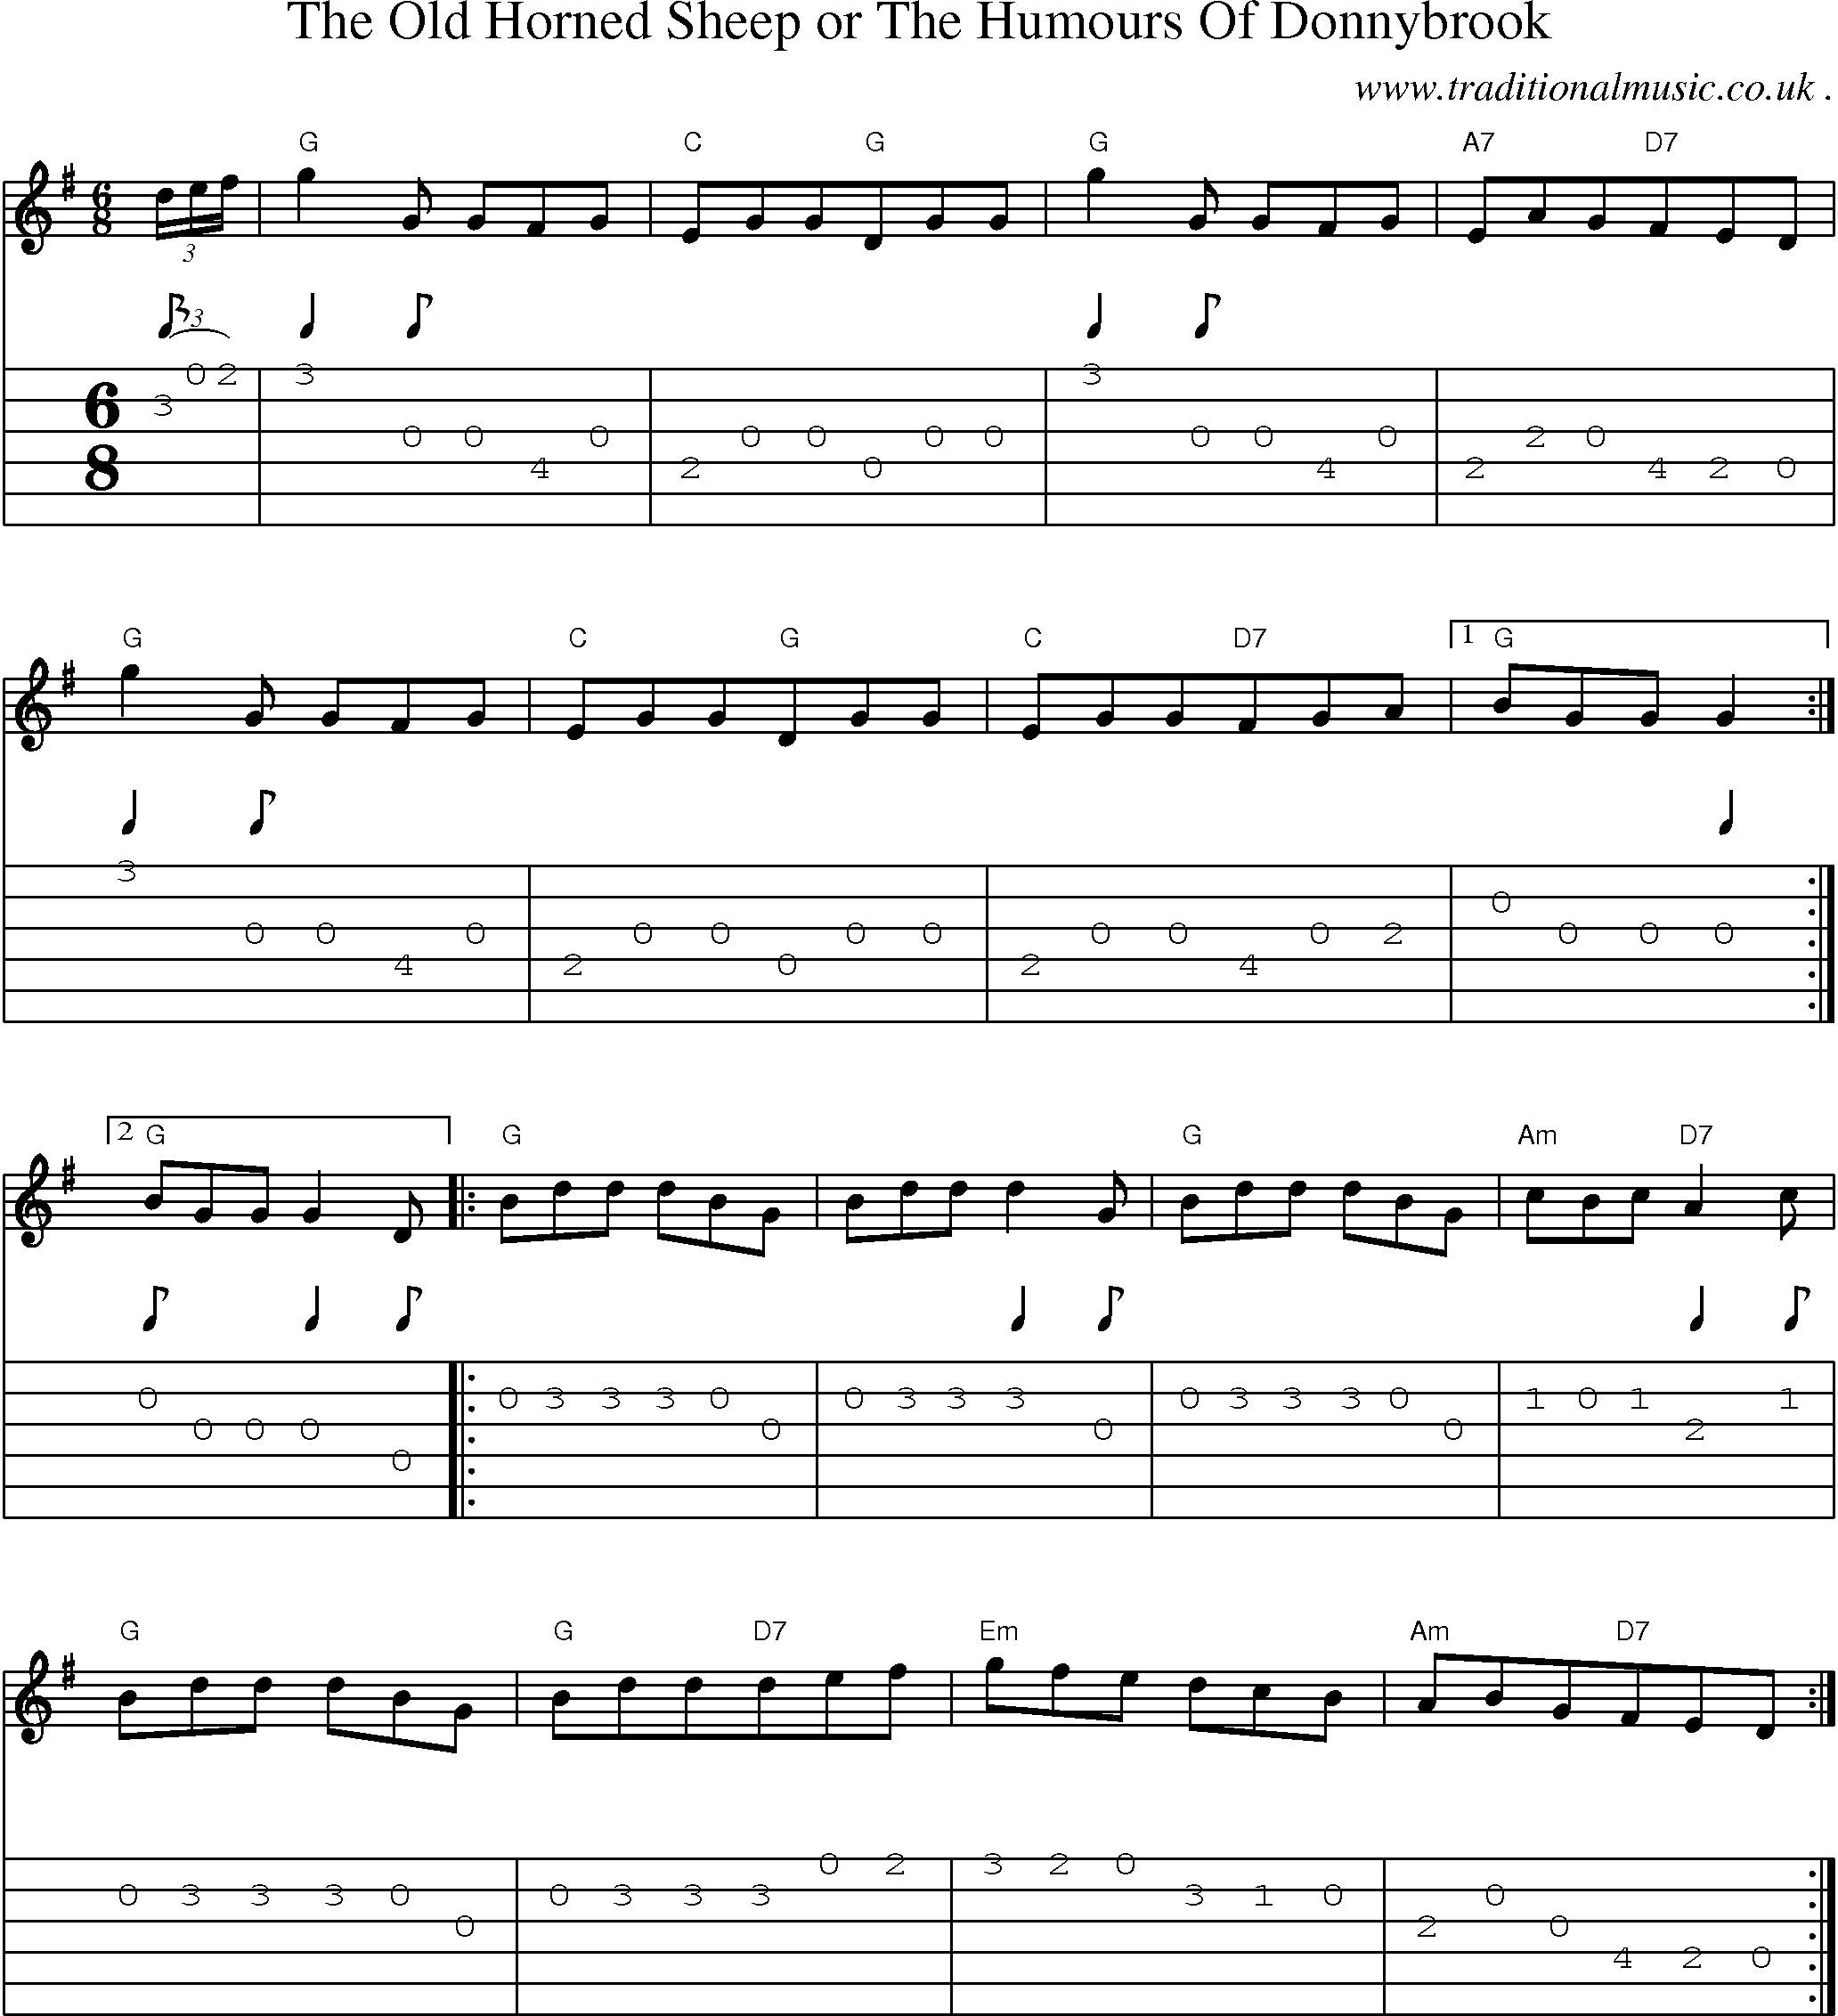 Sheet-Music and Guitar Tabs for The Old Horned Sheep Or The Humours Of Donnybrook